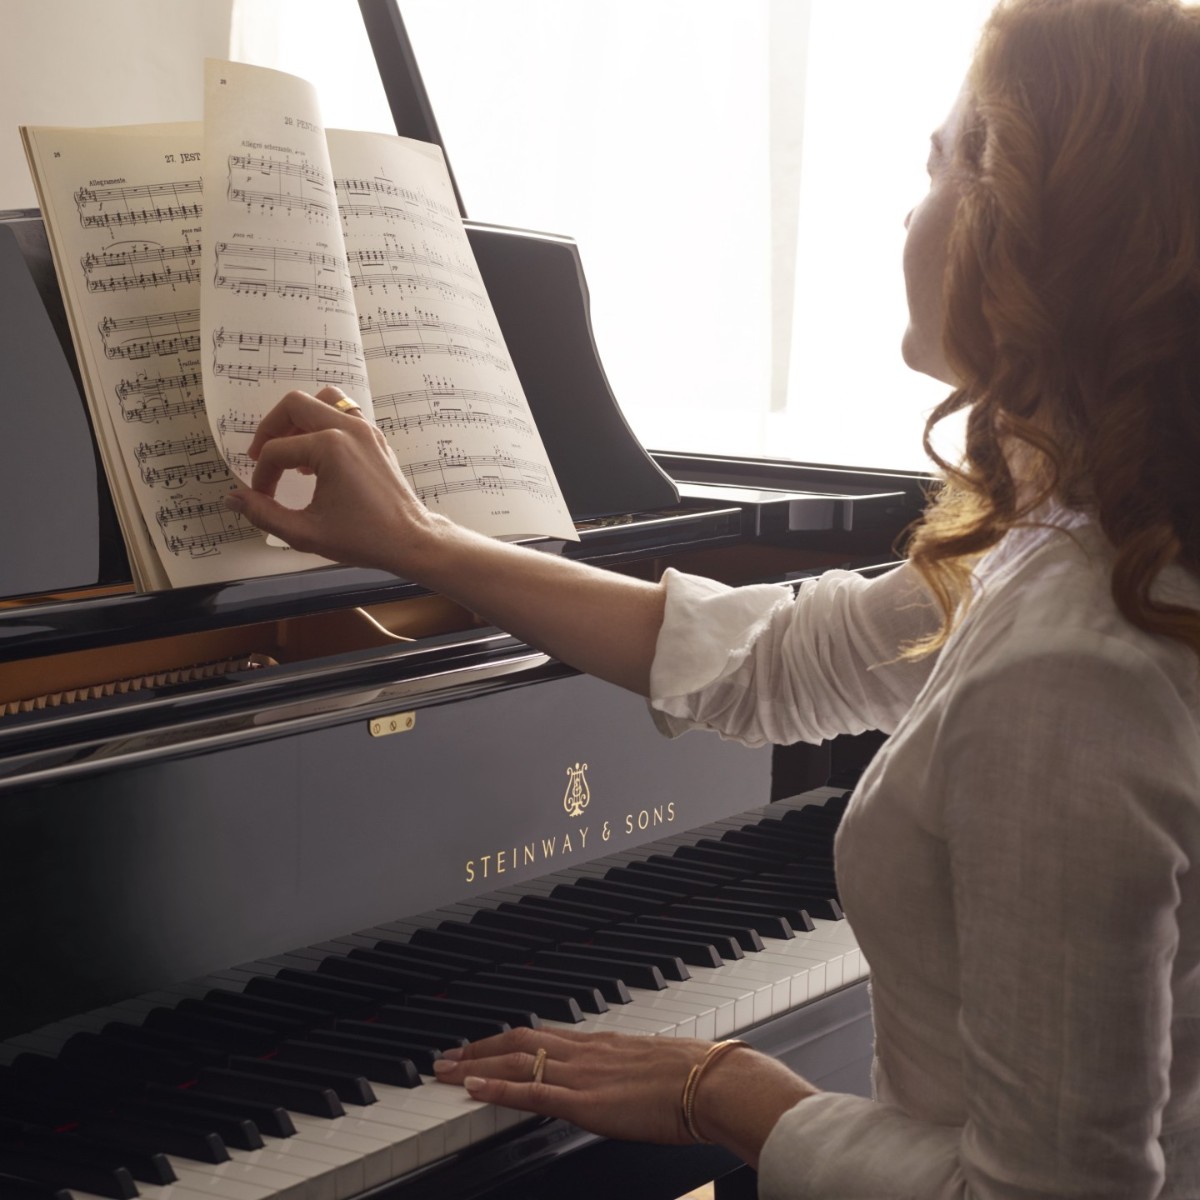 Steinway & Sons has an established network of piano teachers nationwide. Whatever your level, Steinway & Sons can connect you with a high-quality, trusted piano teacher that meets your needs. Learn more ▶️ brnw.ch/21wHOcE 🎹✨